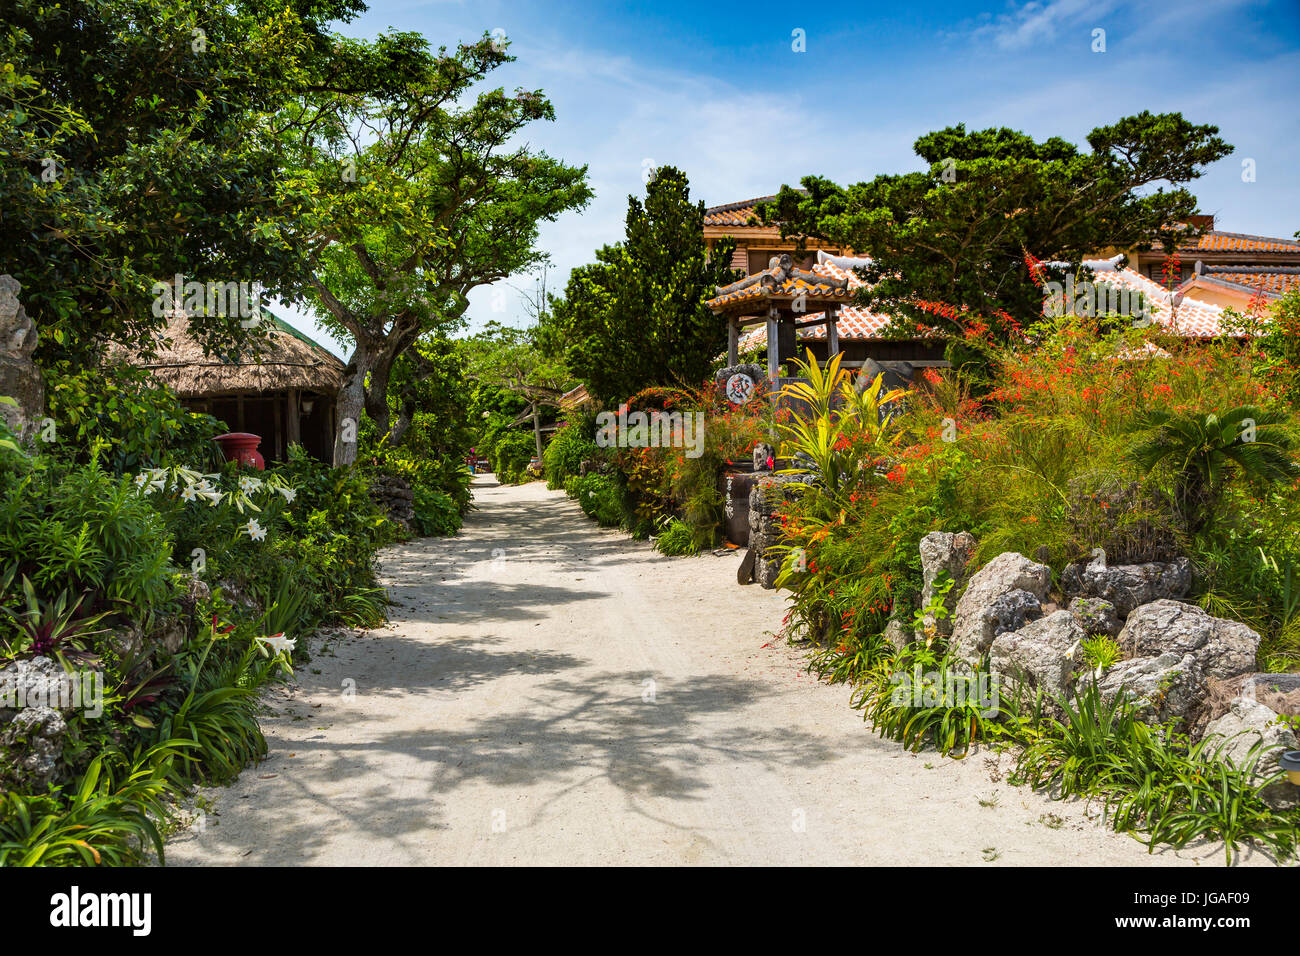 Sand street with bougainvillea flowers, and stone fencing in a village on Taketomi Island, Okinawa Prefecture, Japan. Stock Photo